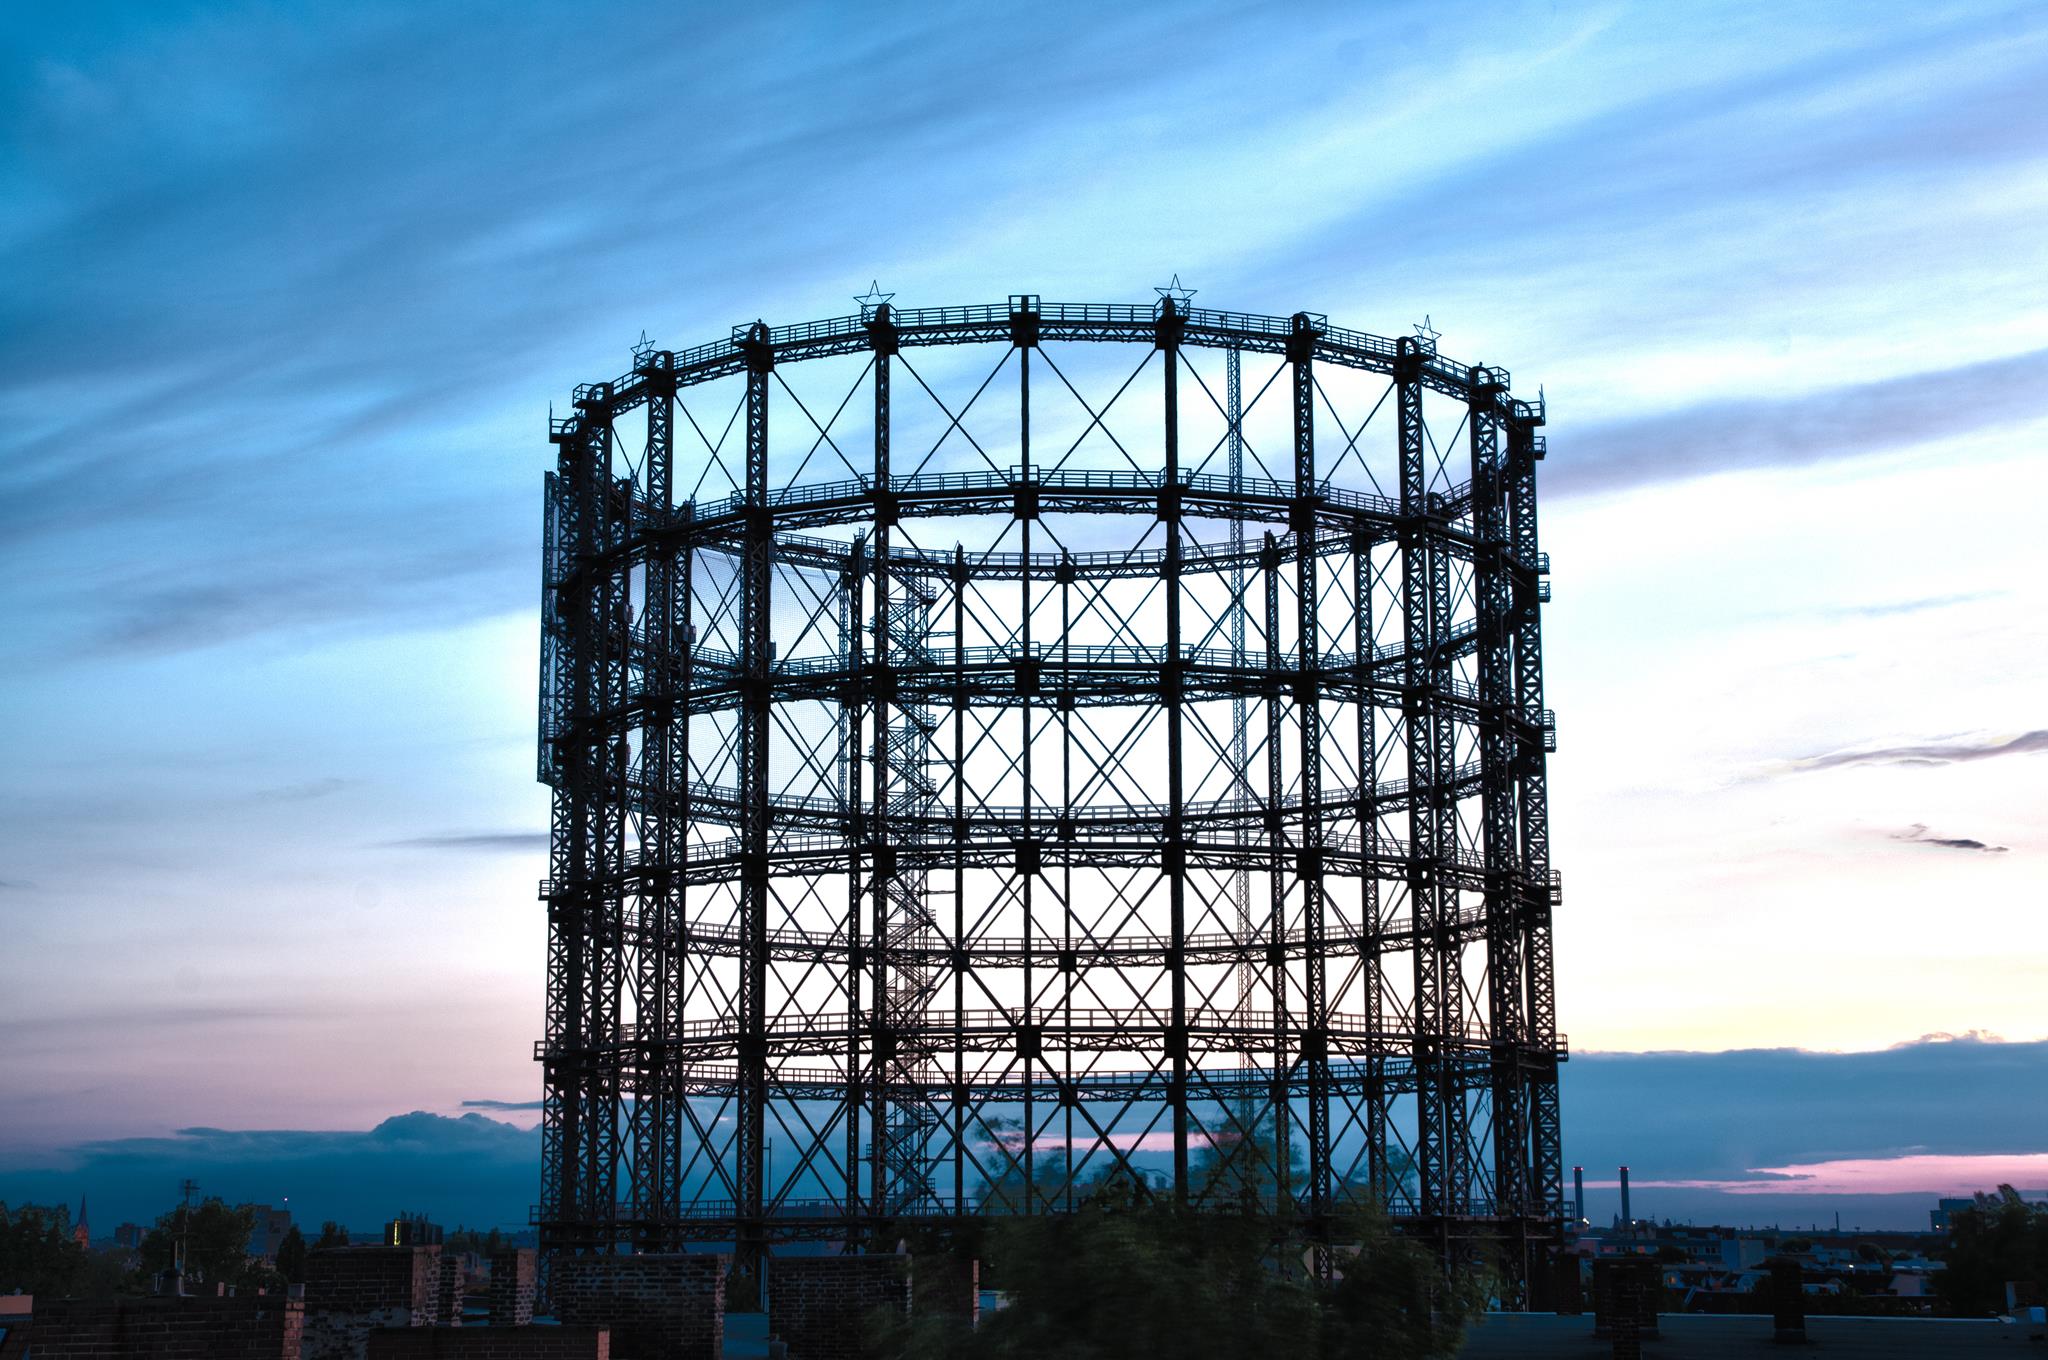 Ronja from the LINDEMANN HOTELS® introduces the Gasometer